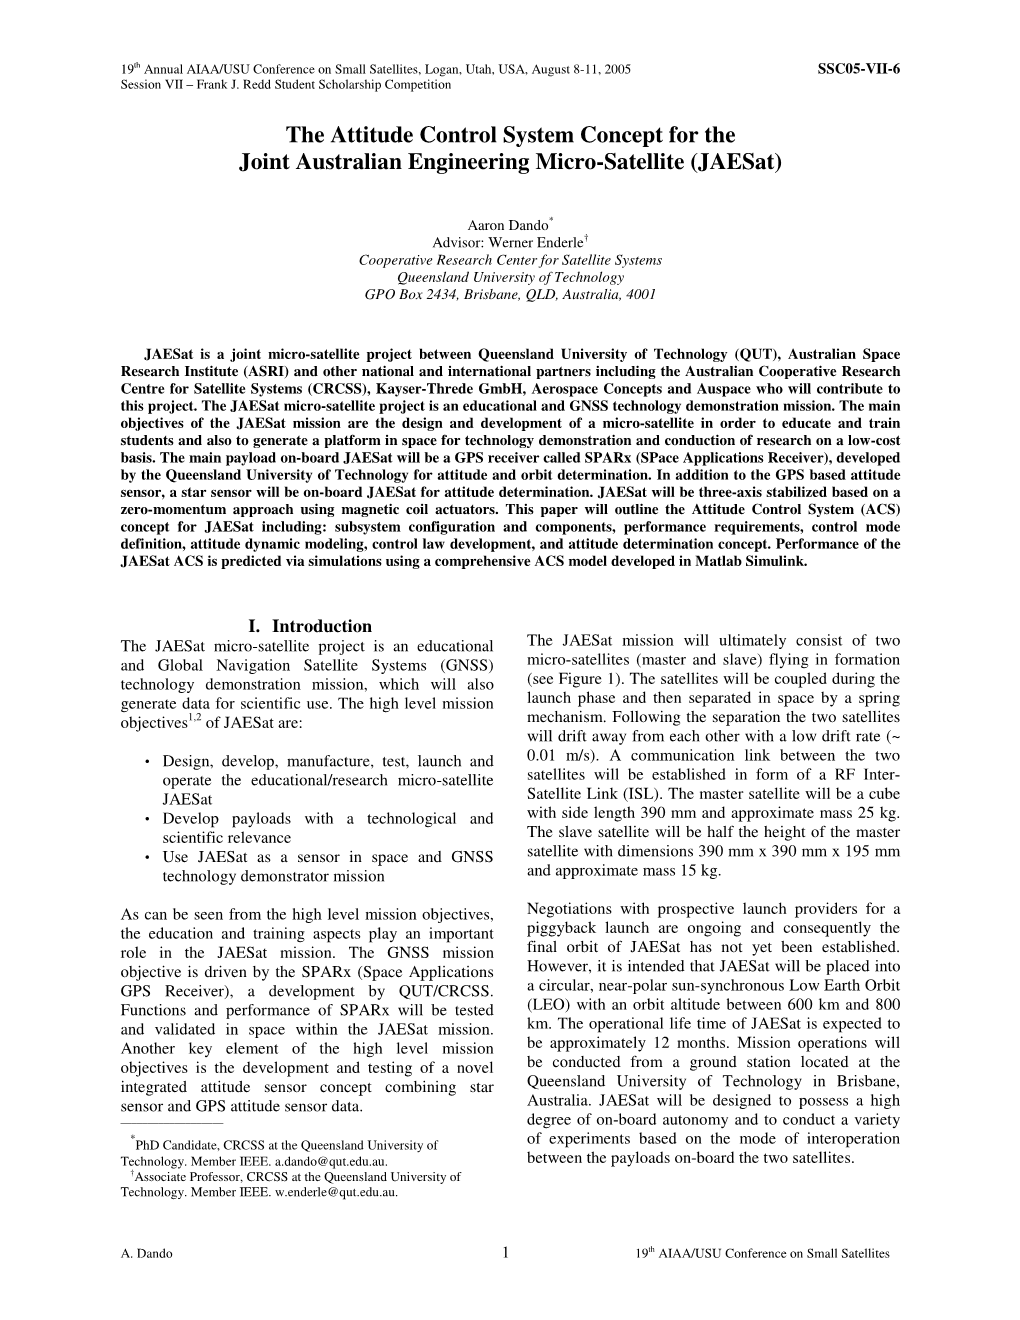 The Attitude Control System Concept for the Joint Australian Engineering Micro-Satellite (Jaesat)